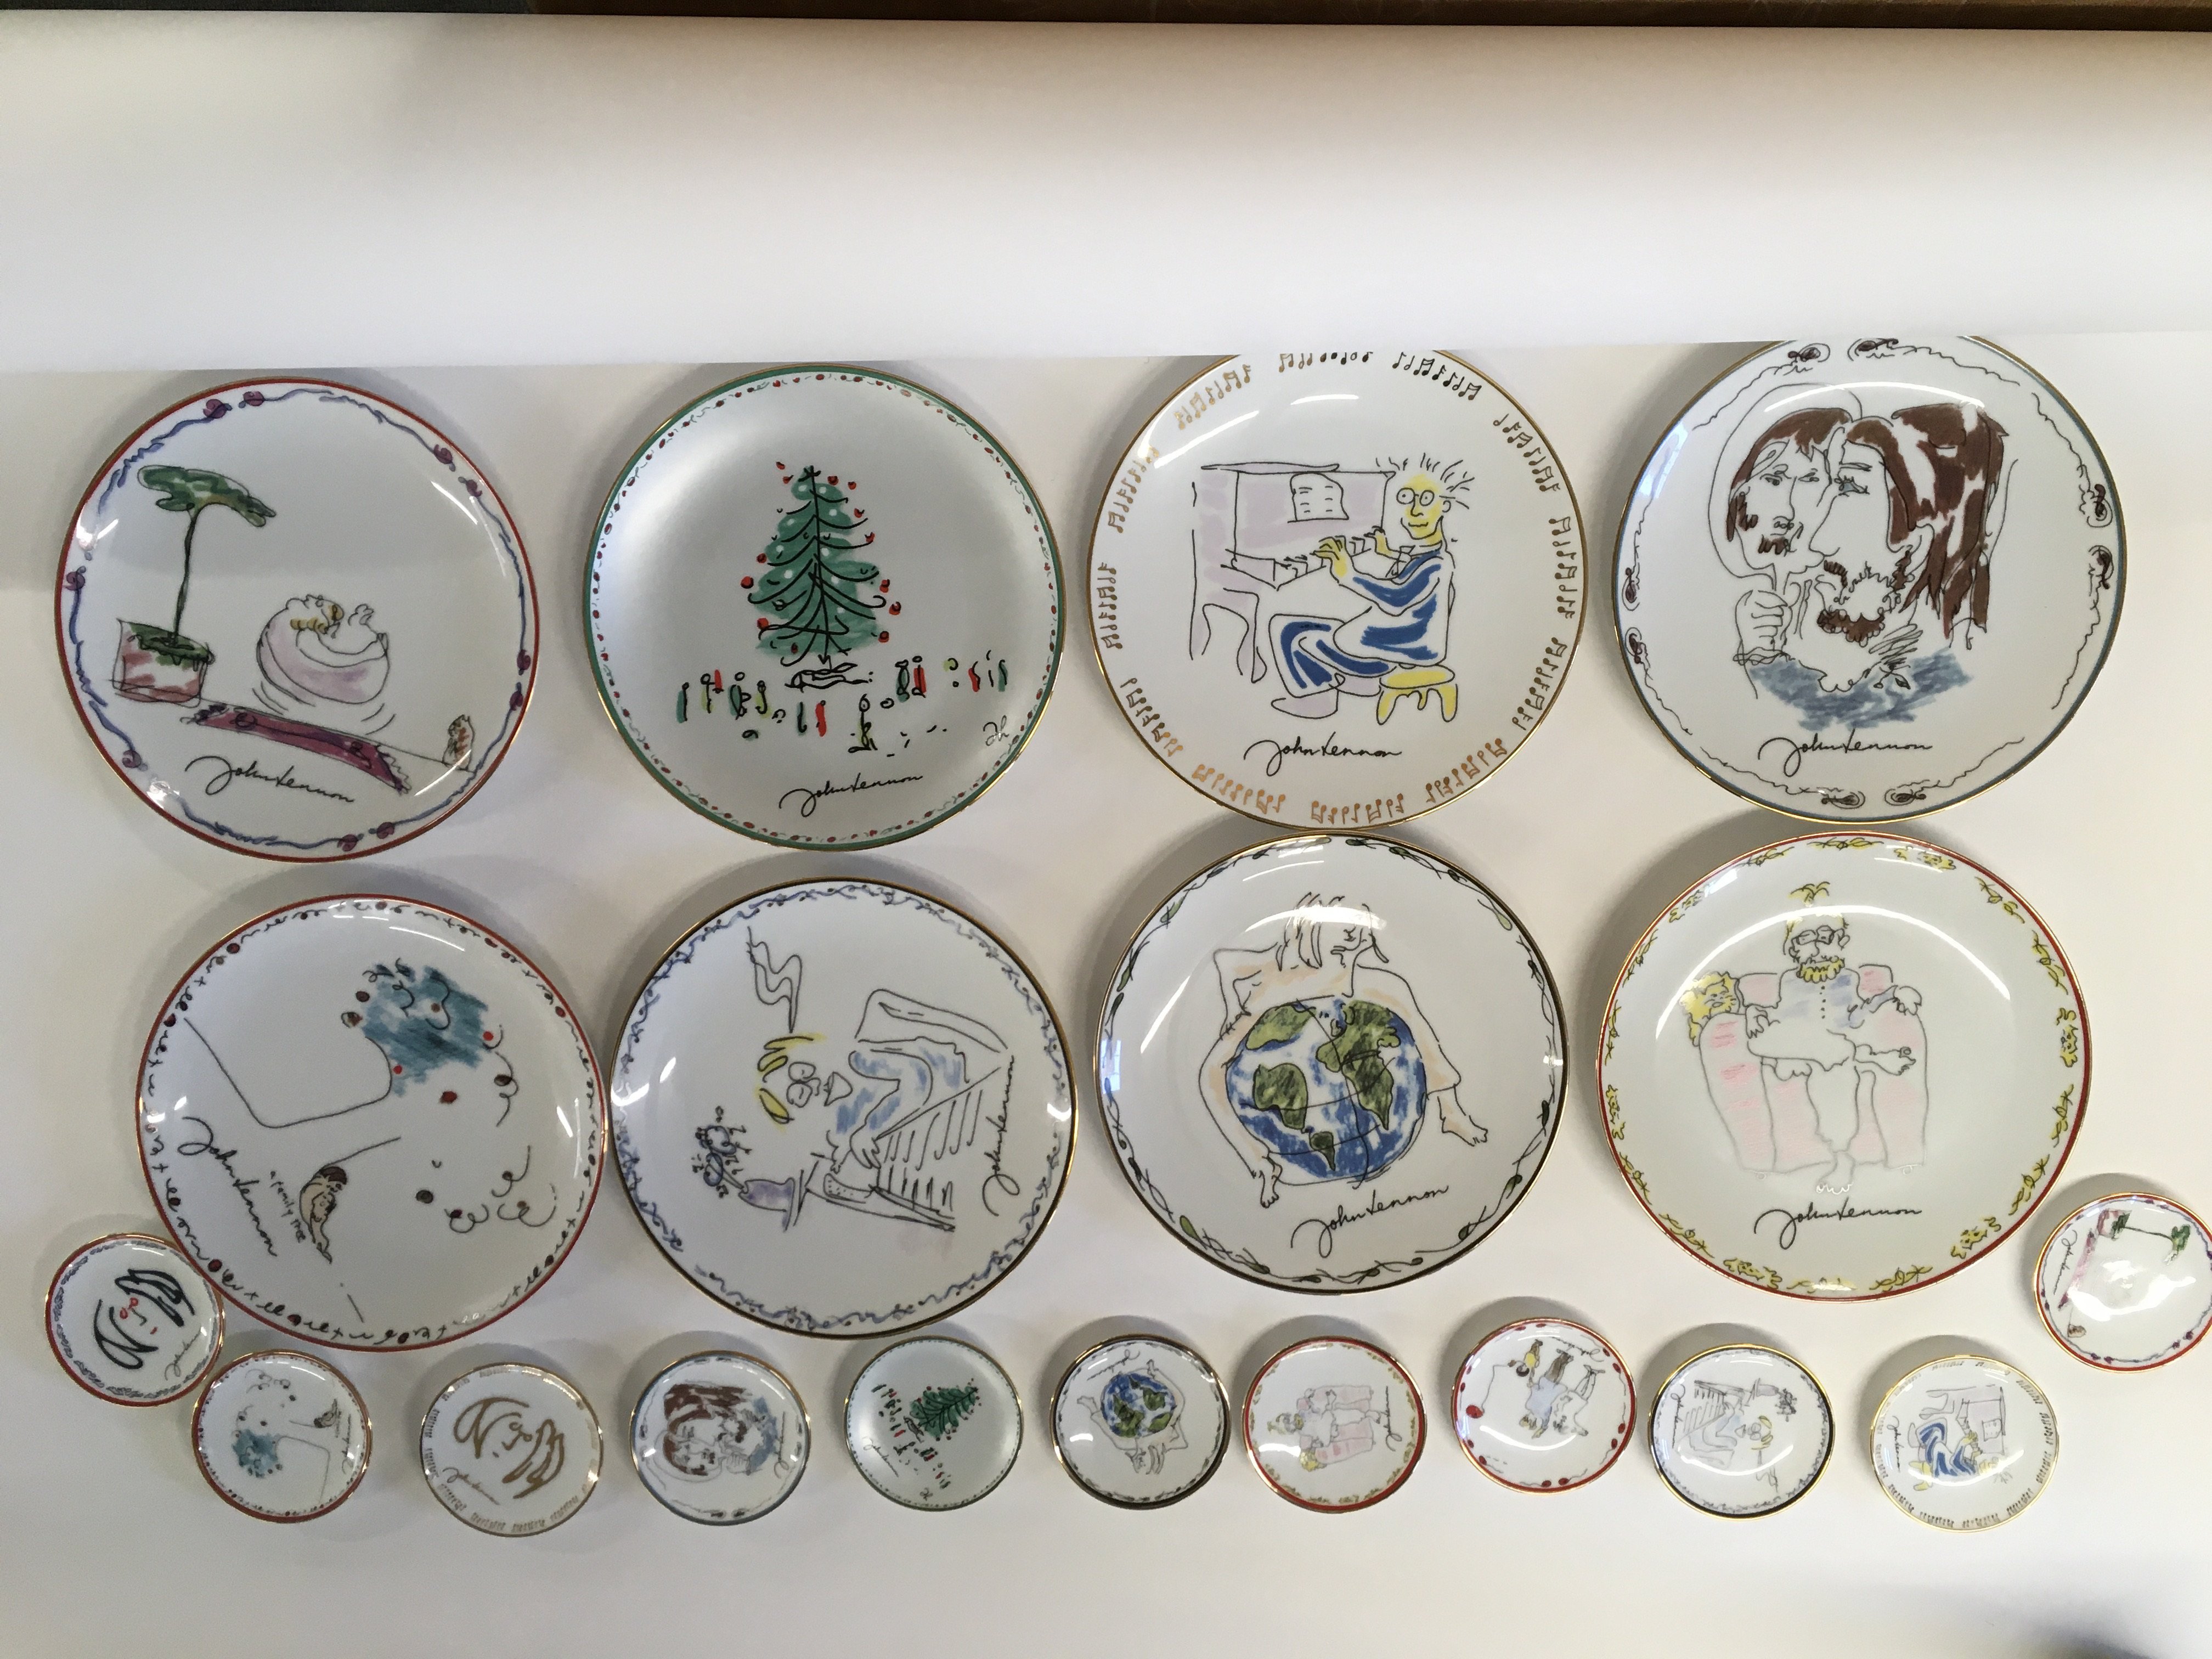 A collection of limited edition Gartlan plates and